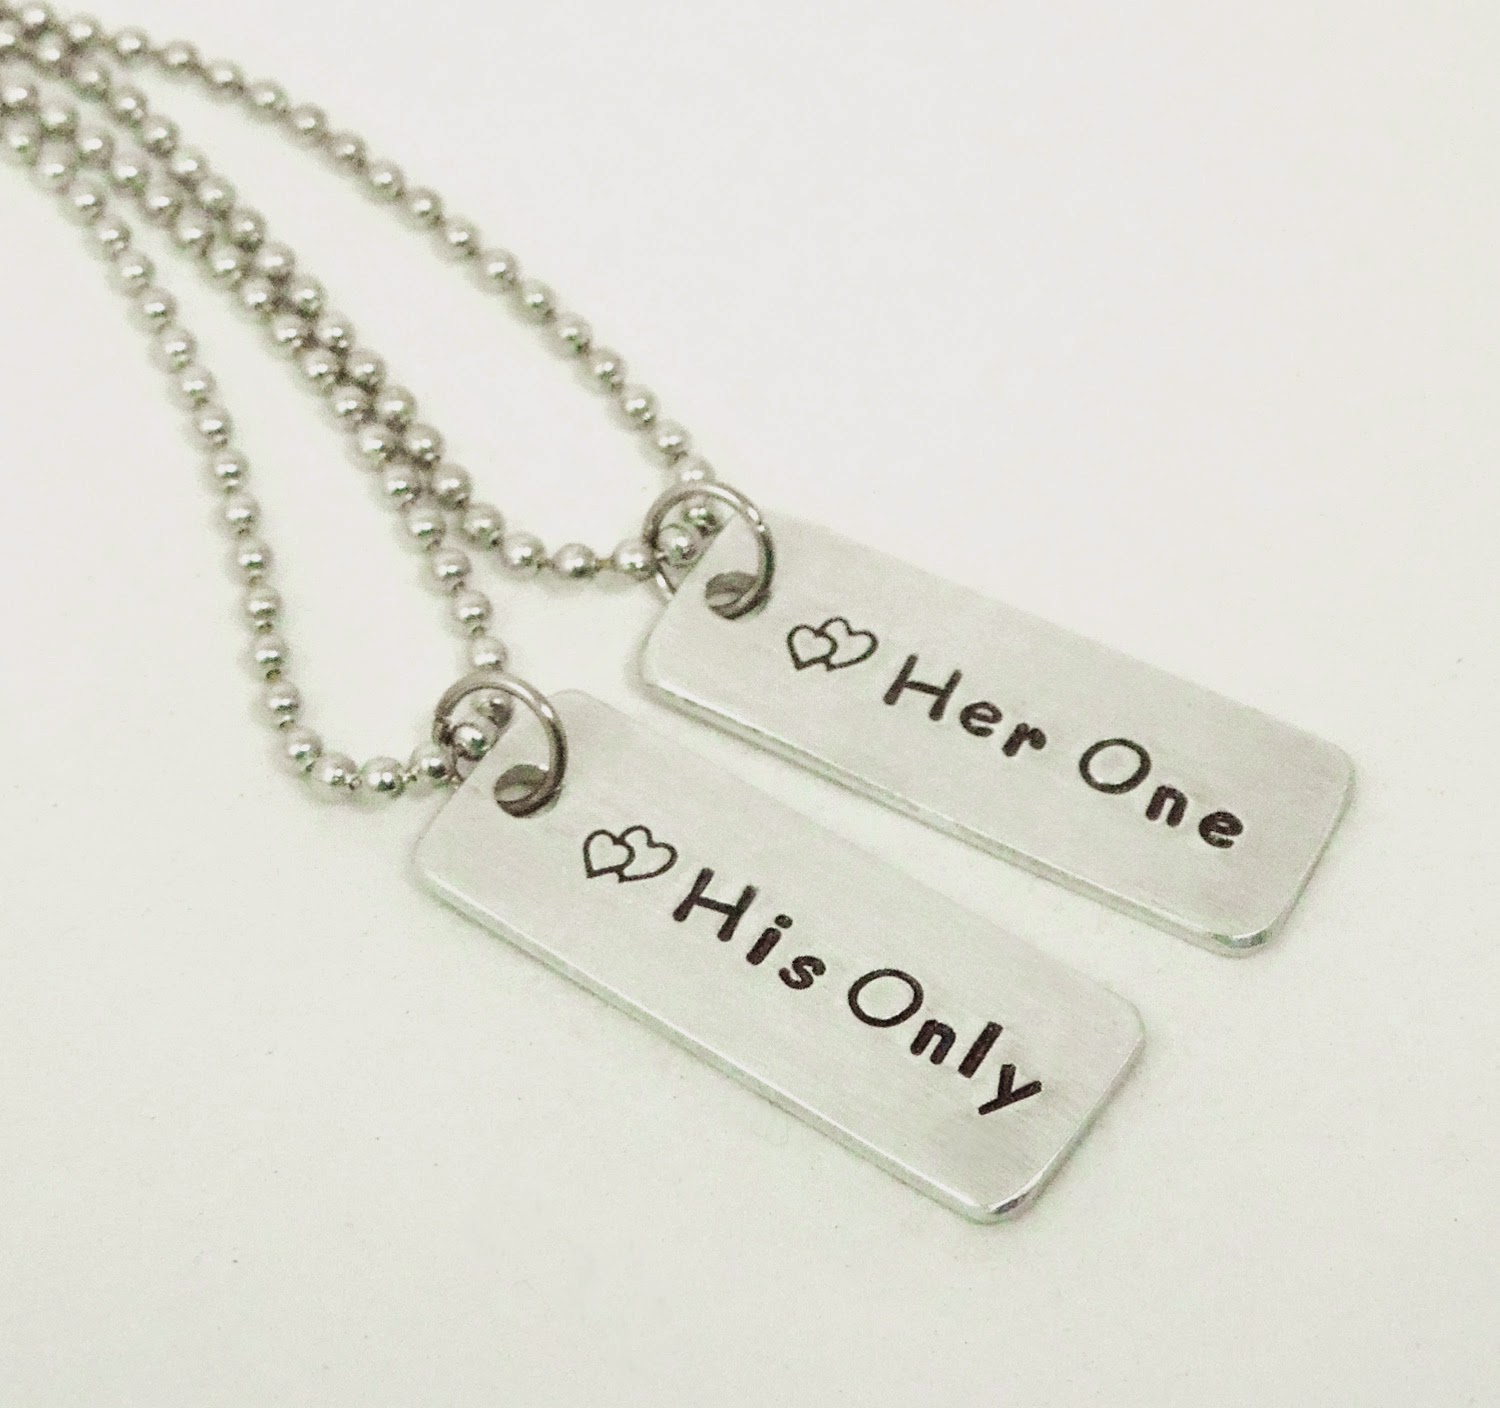 Stamped personalized jewelry, key chains, funny greeting cards, and ...